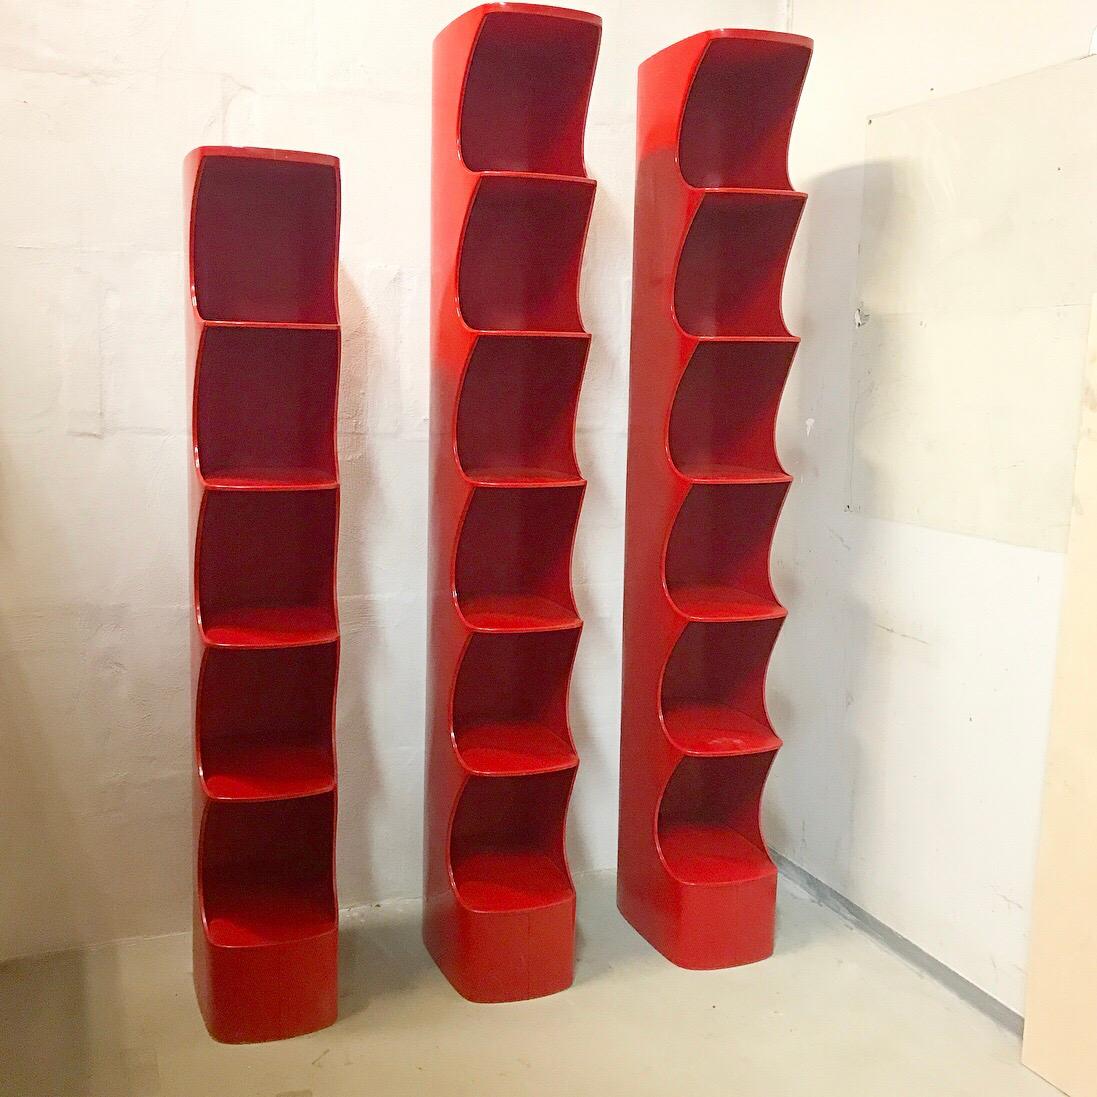 French Valirie Dubrocinskis Set of Three Space Age Bookcases by Rodier, France 1970